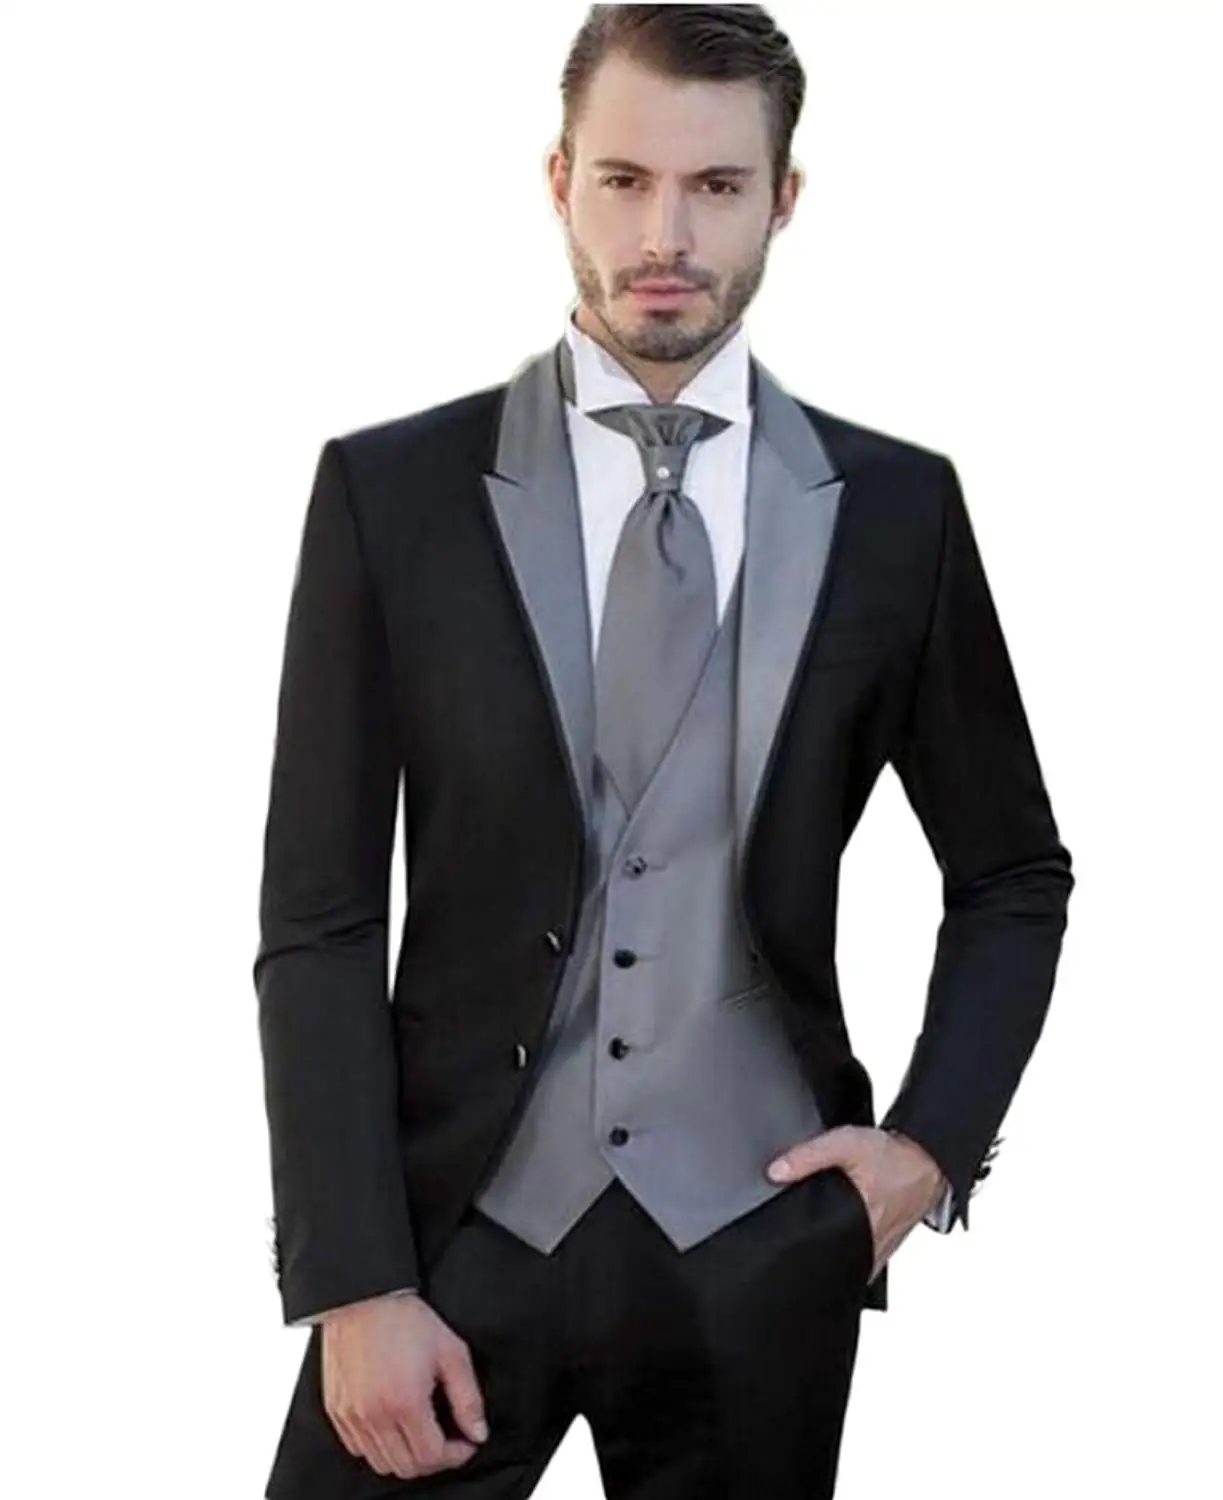 Cheap Wedding Suit Casual Find Wedding Suit Casual Deals On Line At